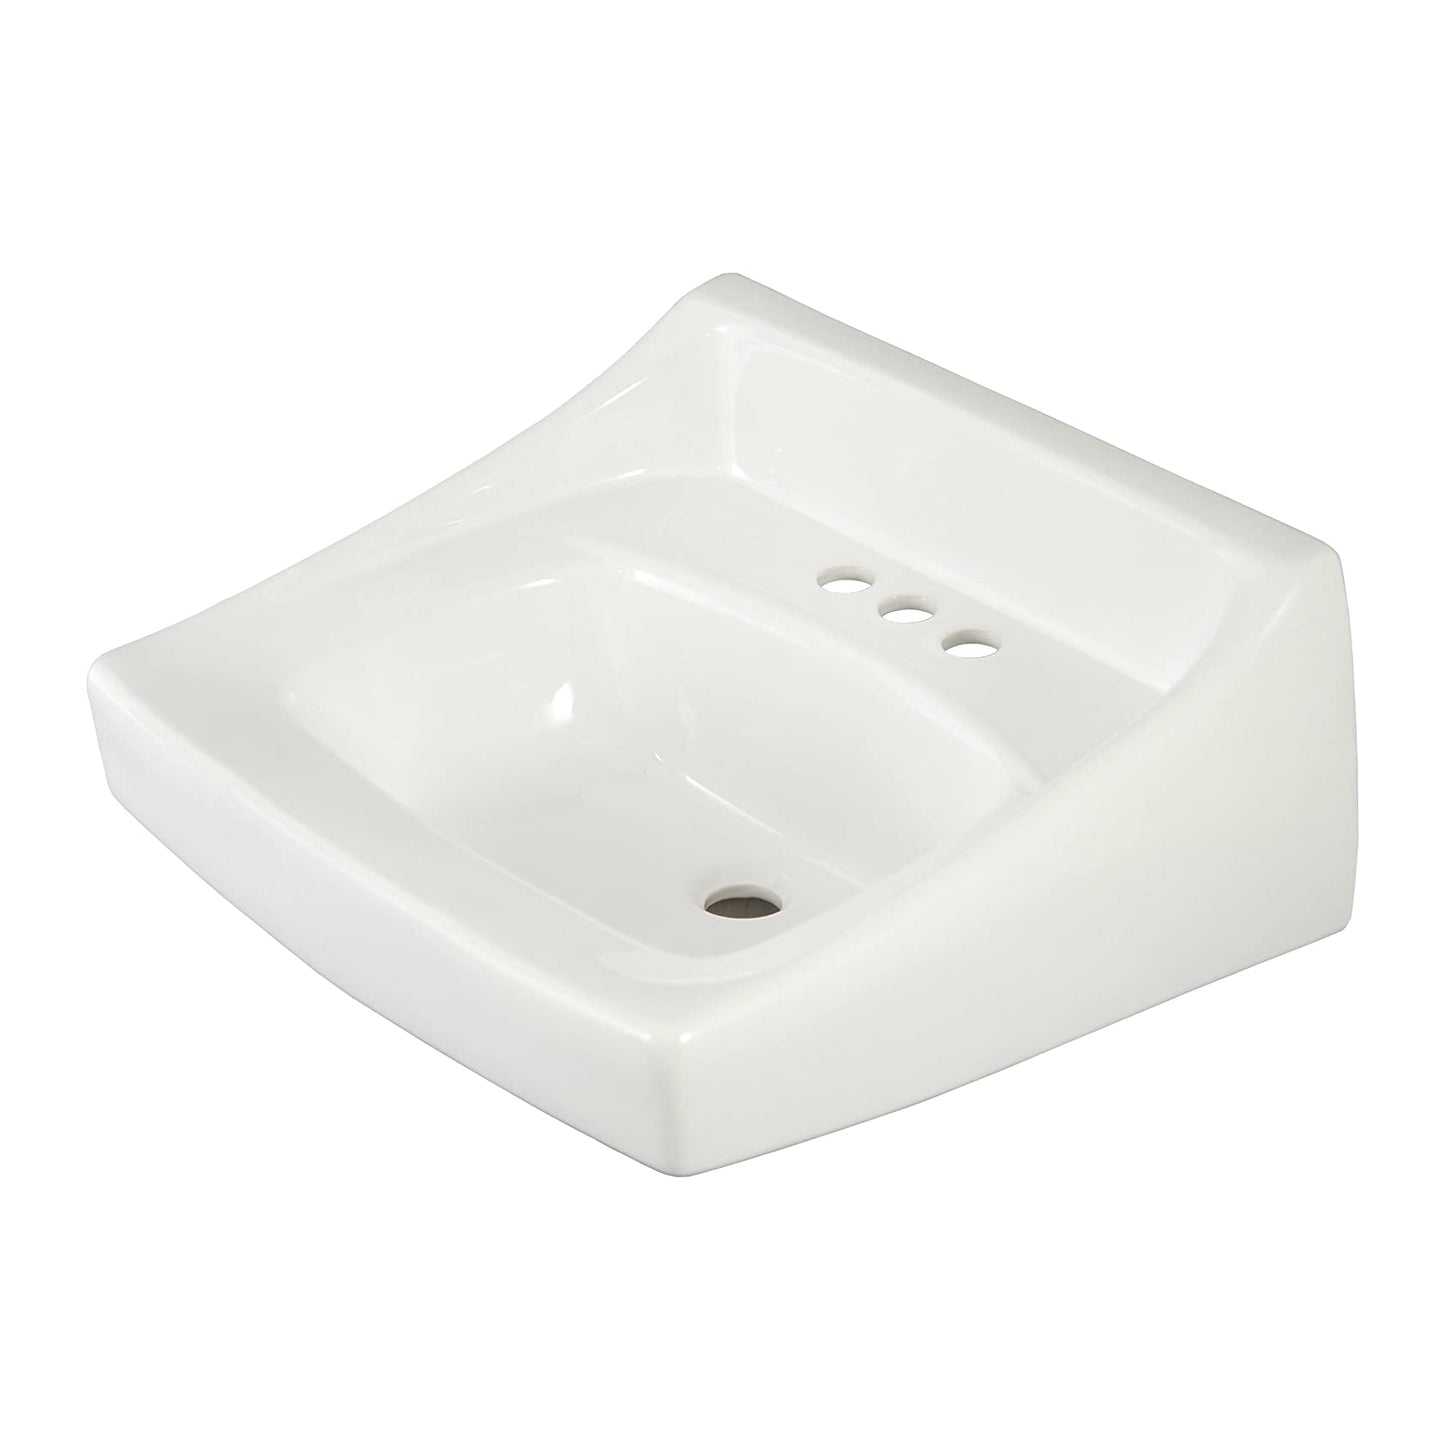 Toto LT307.4#01 - 4" Faucet Centers Commercial Wall-Hung Bathroom Sink - Cotton White